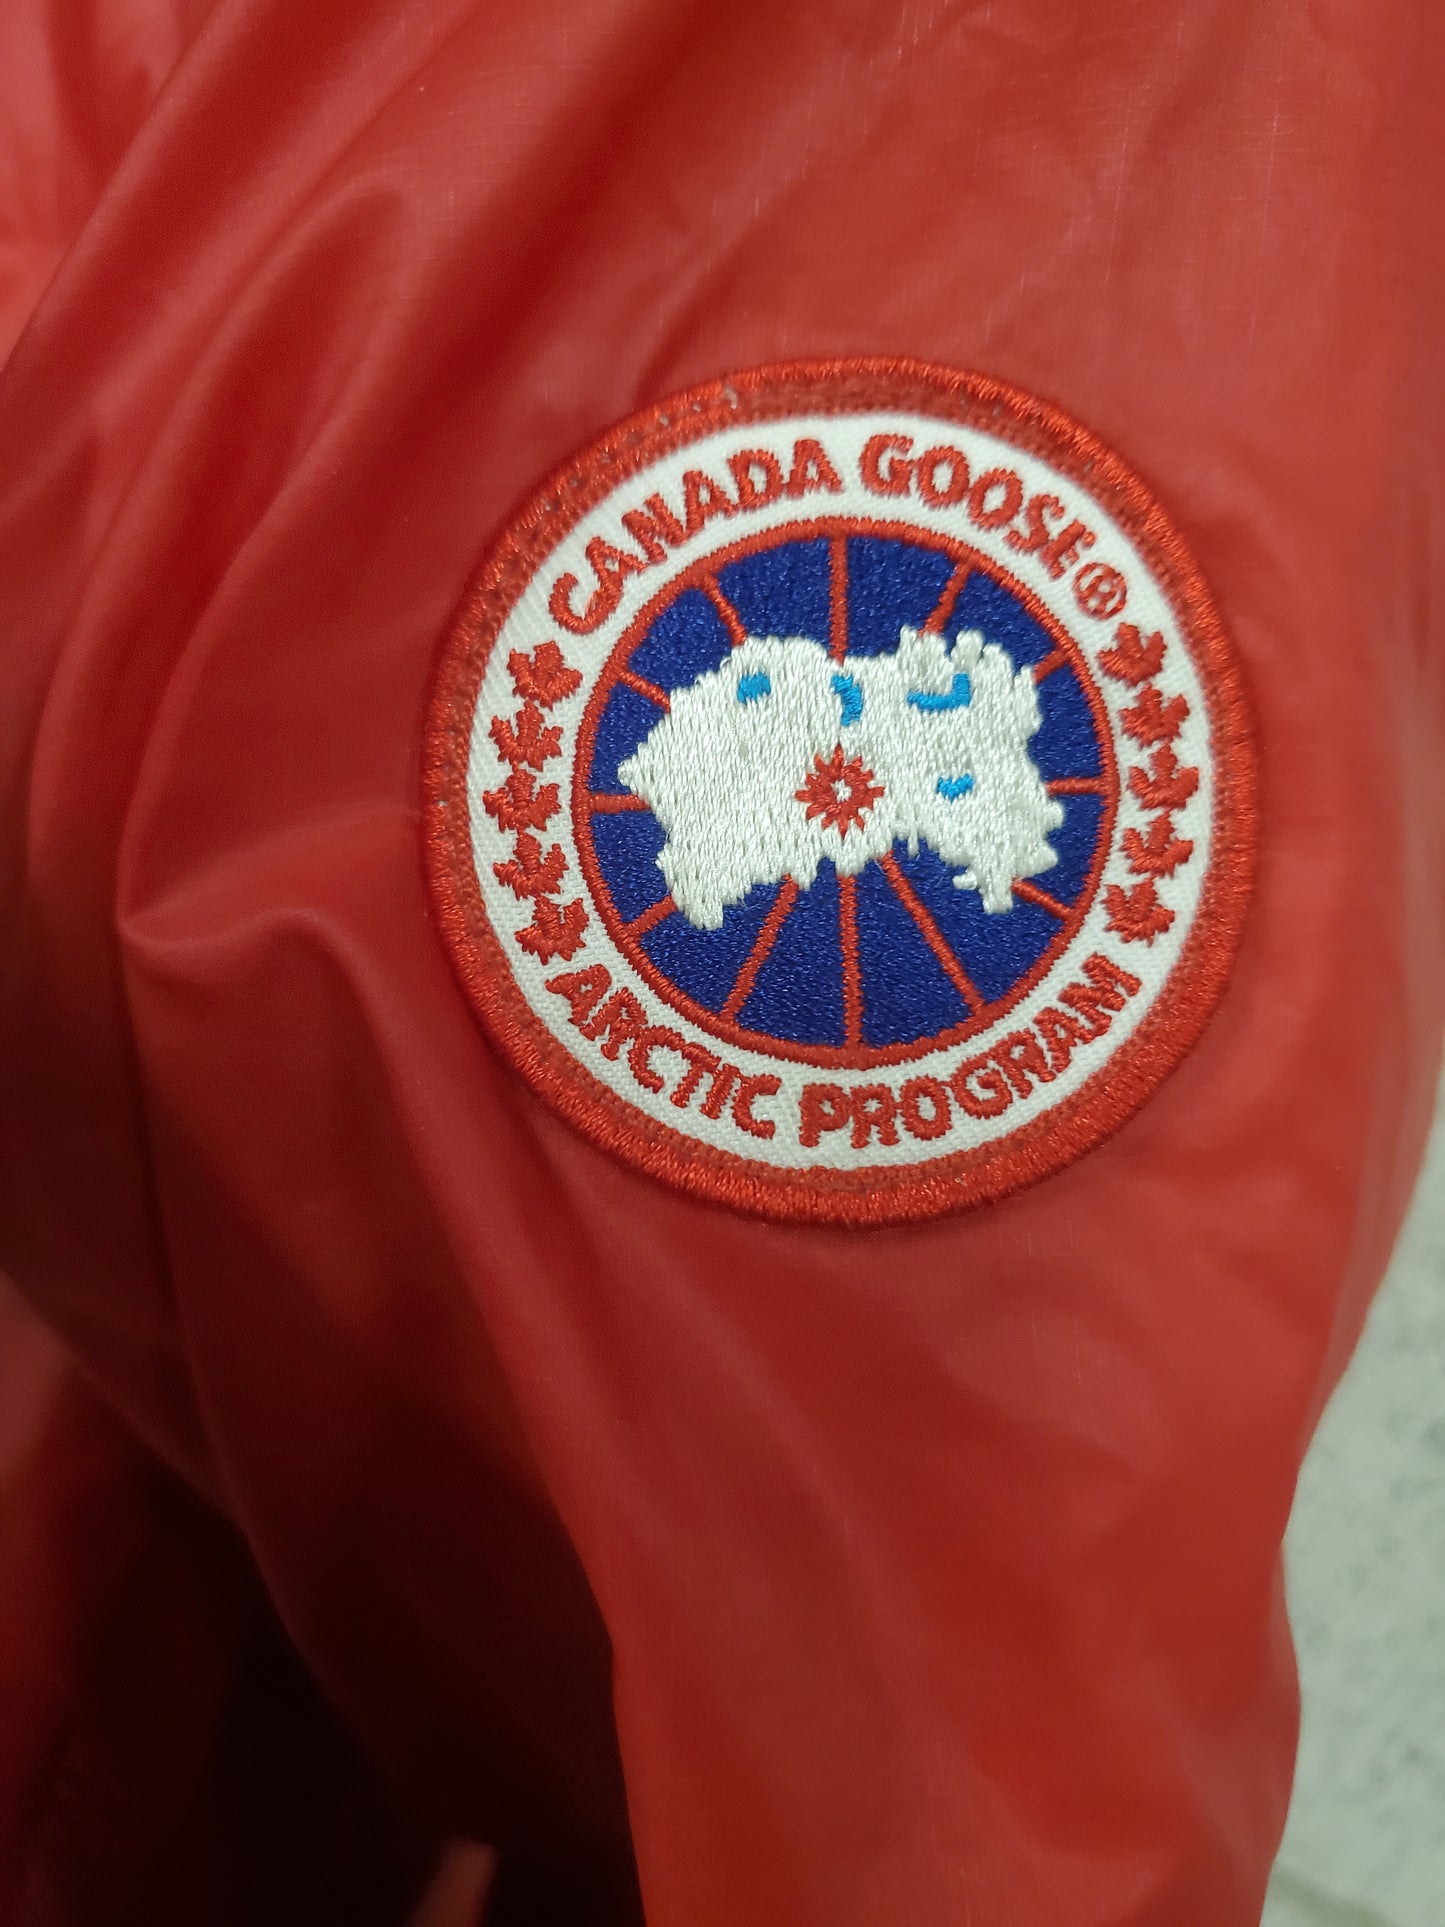 Womens Canada Goose Camp Down Hooded Jacket Style #5061L Size Medium